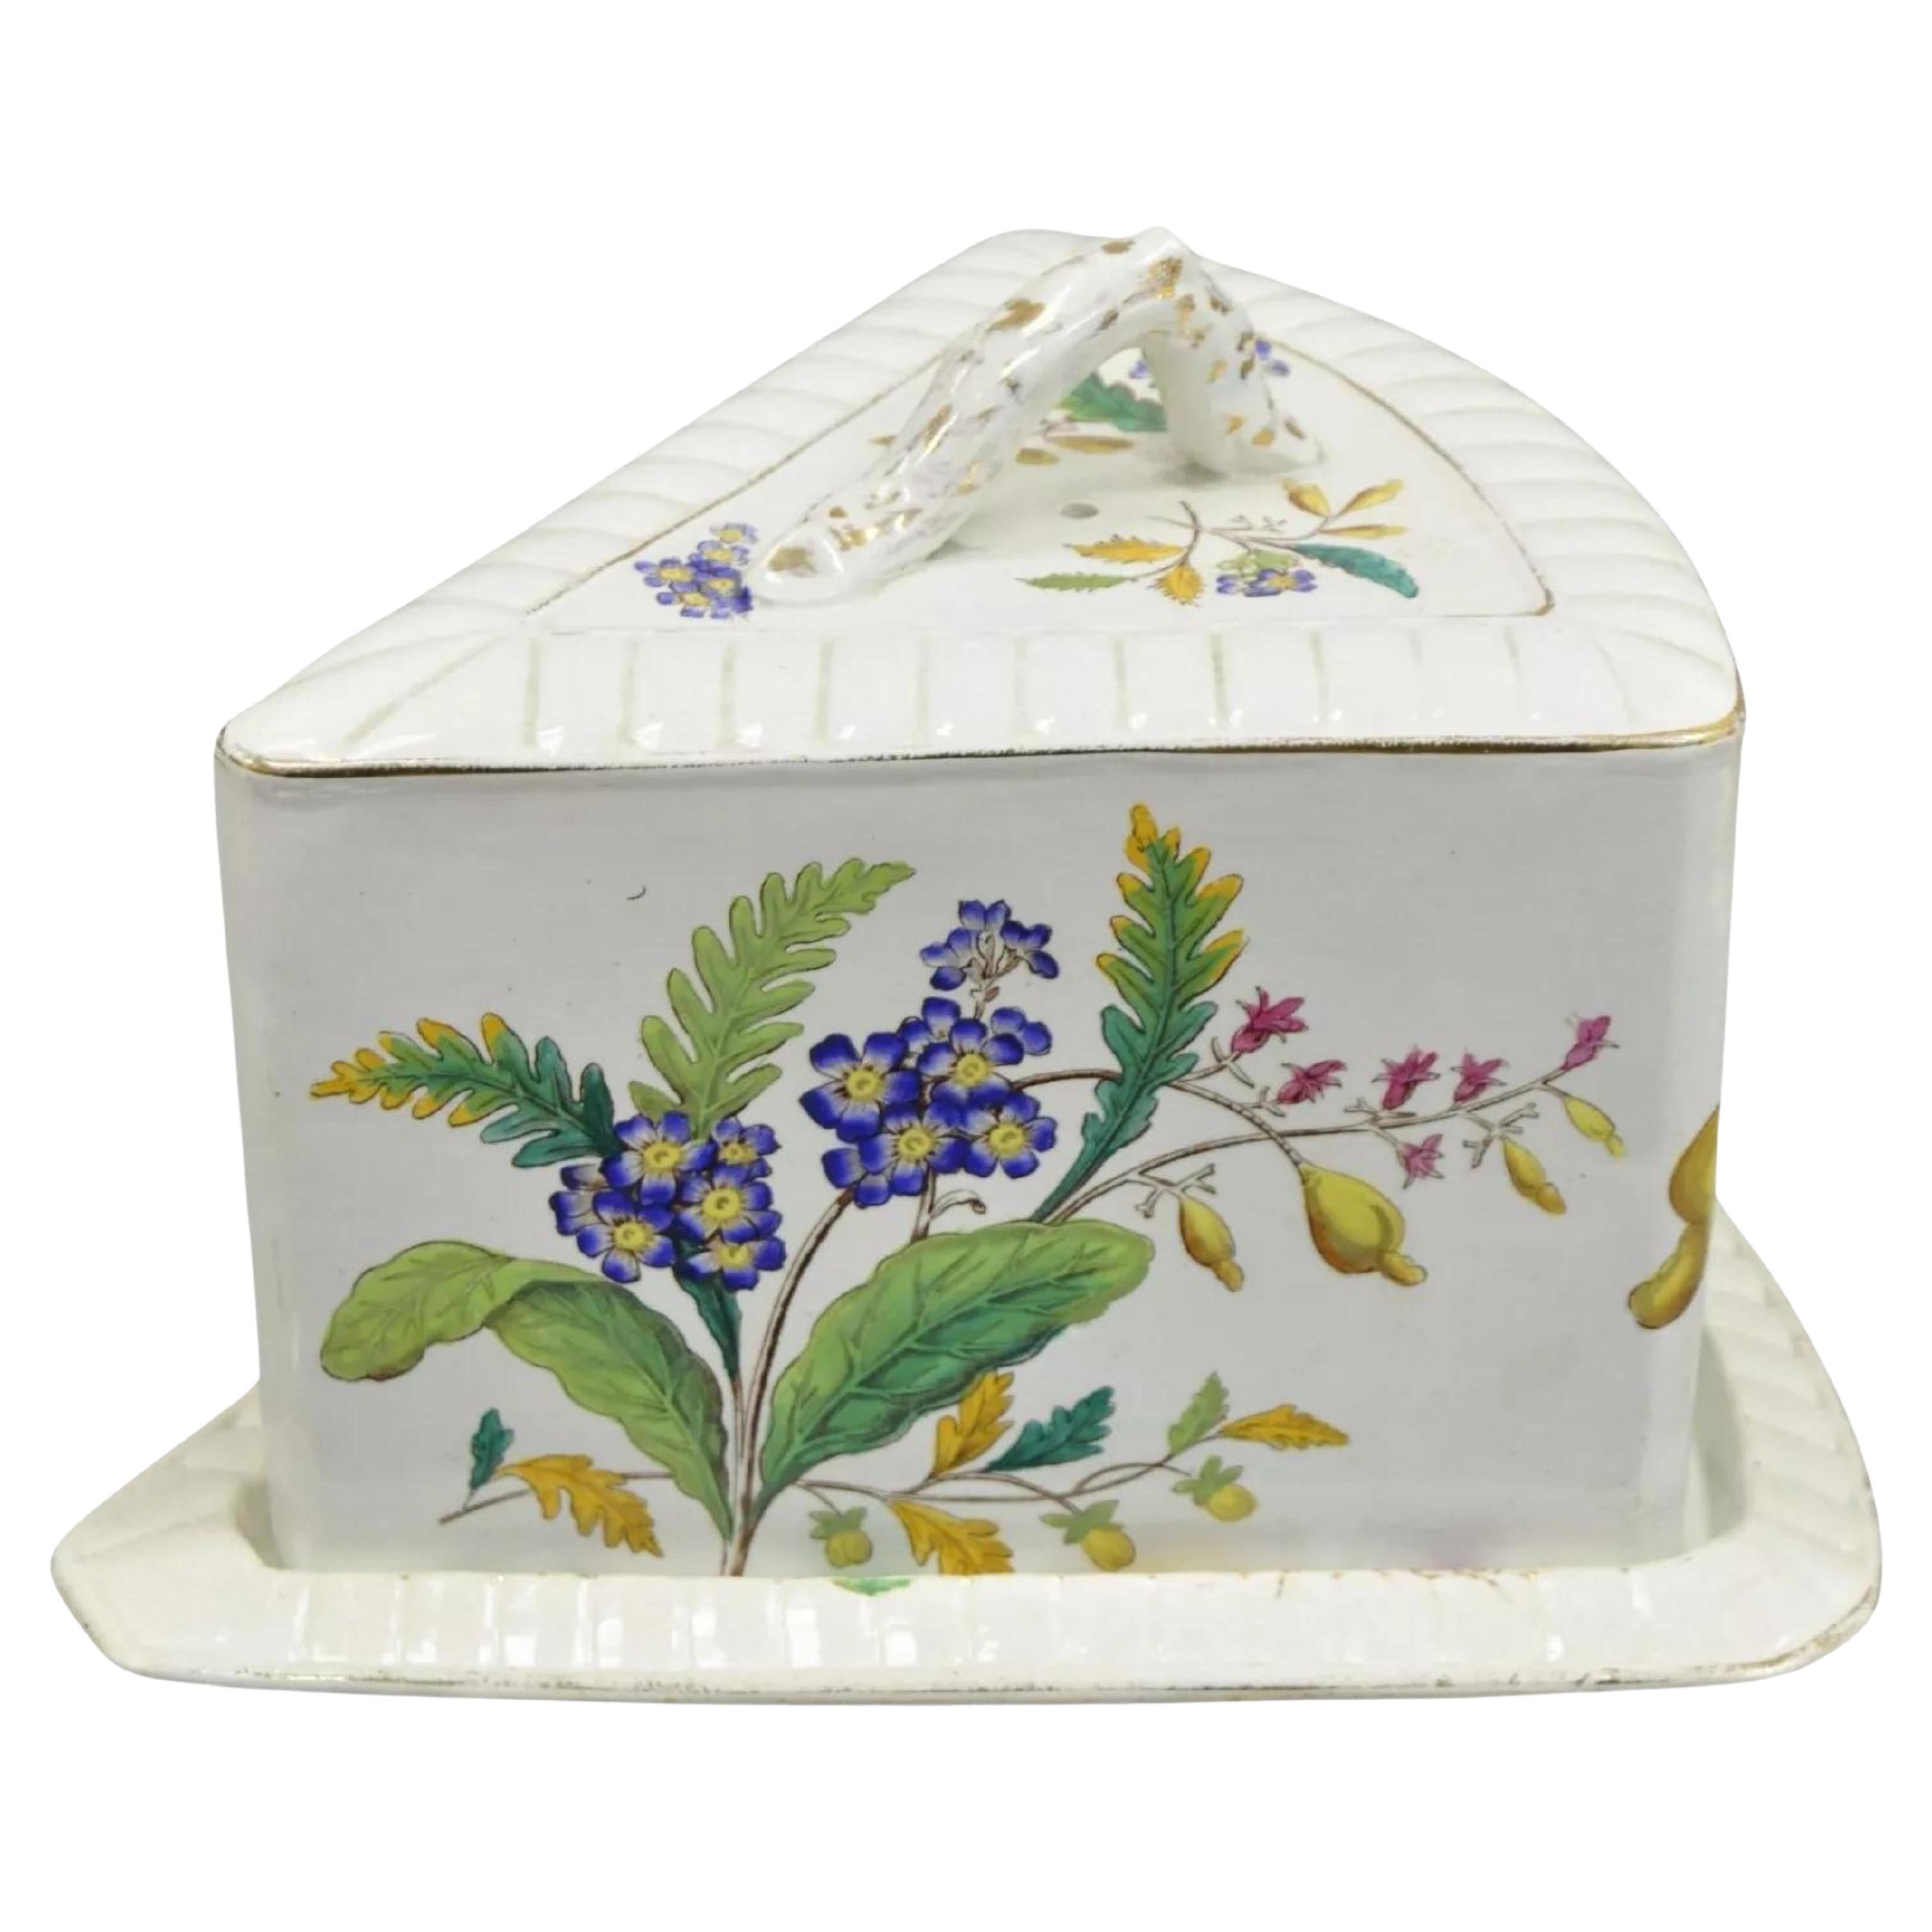 Antique Victorian Large Porcelain Covered Cheese Dish with Flowers and Leaves For Sale